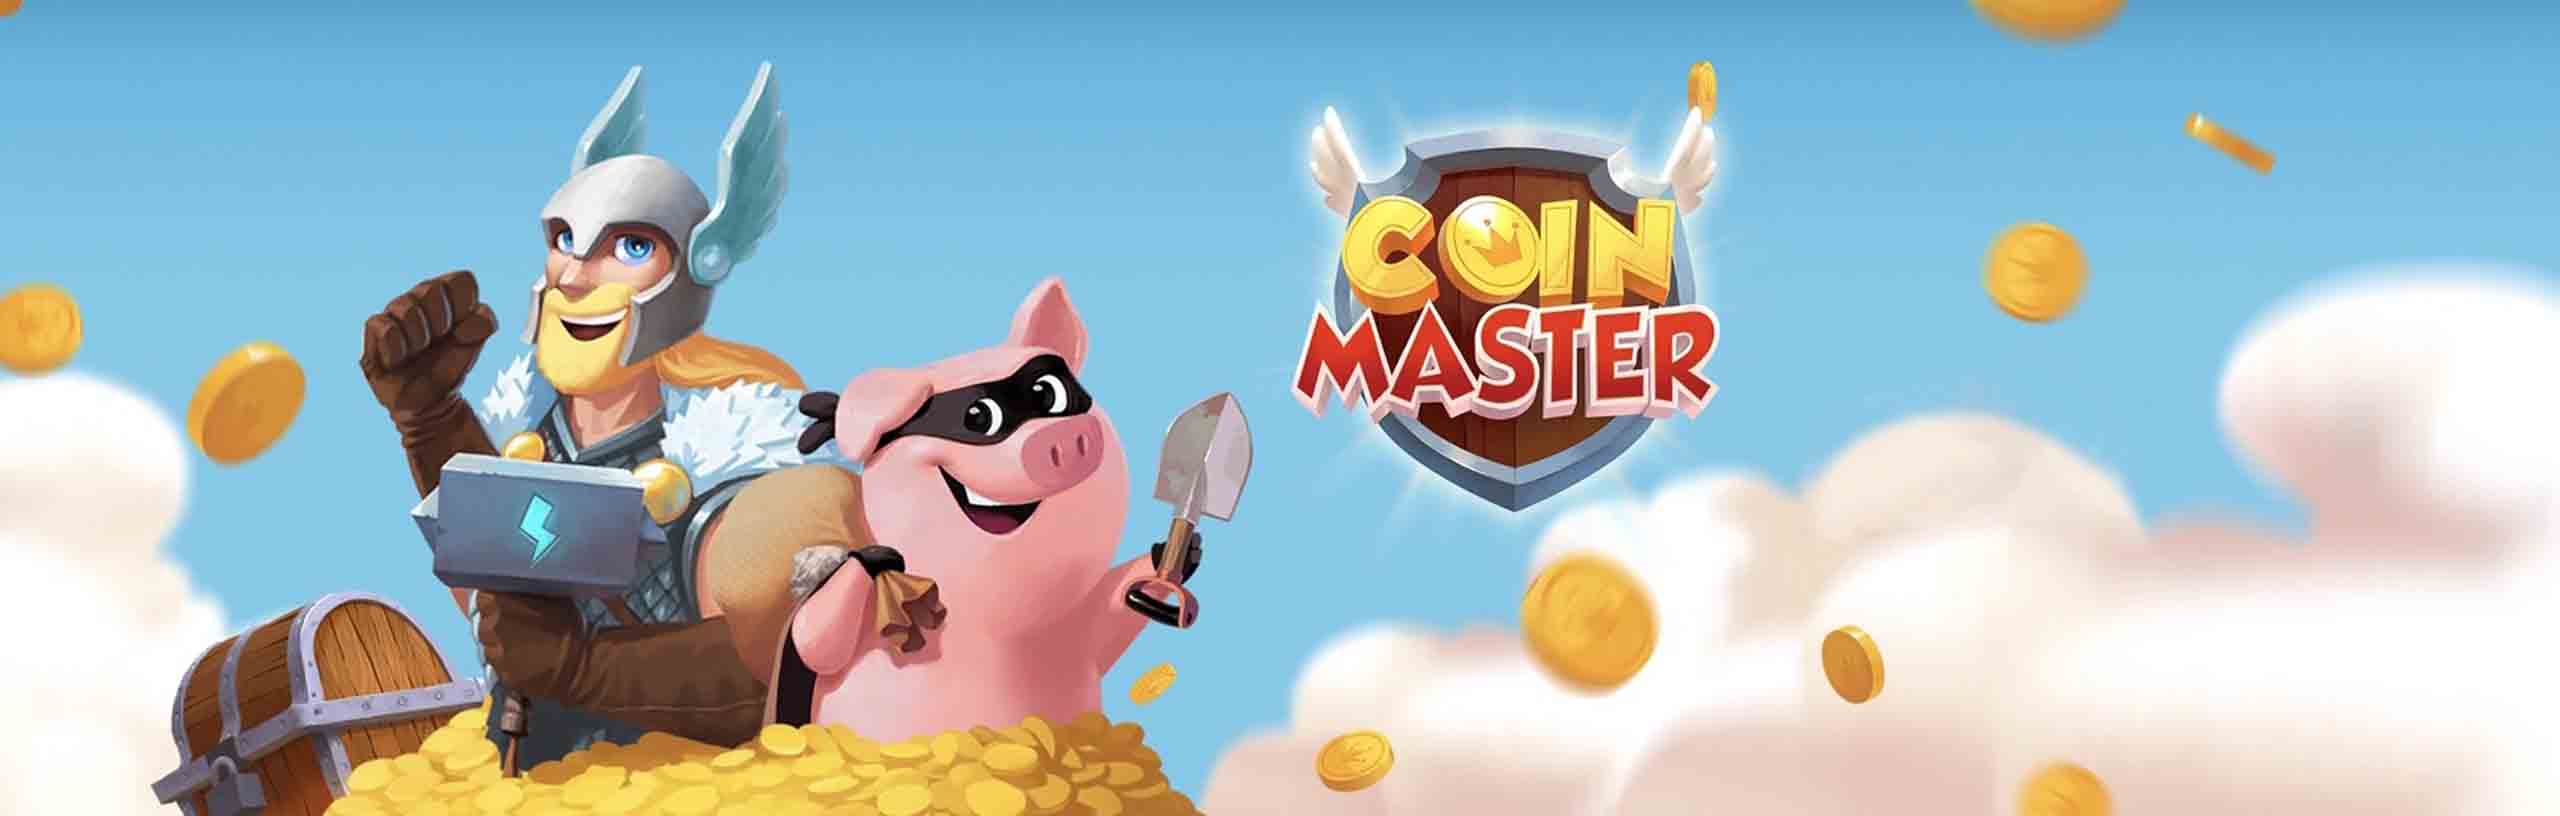 play coin master online